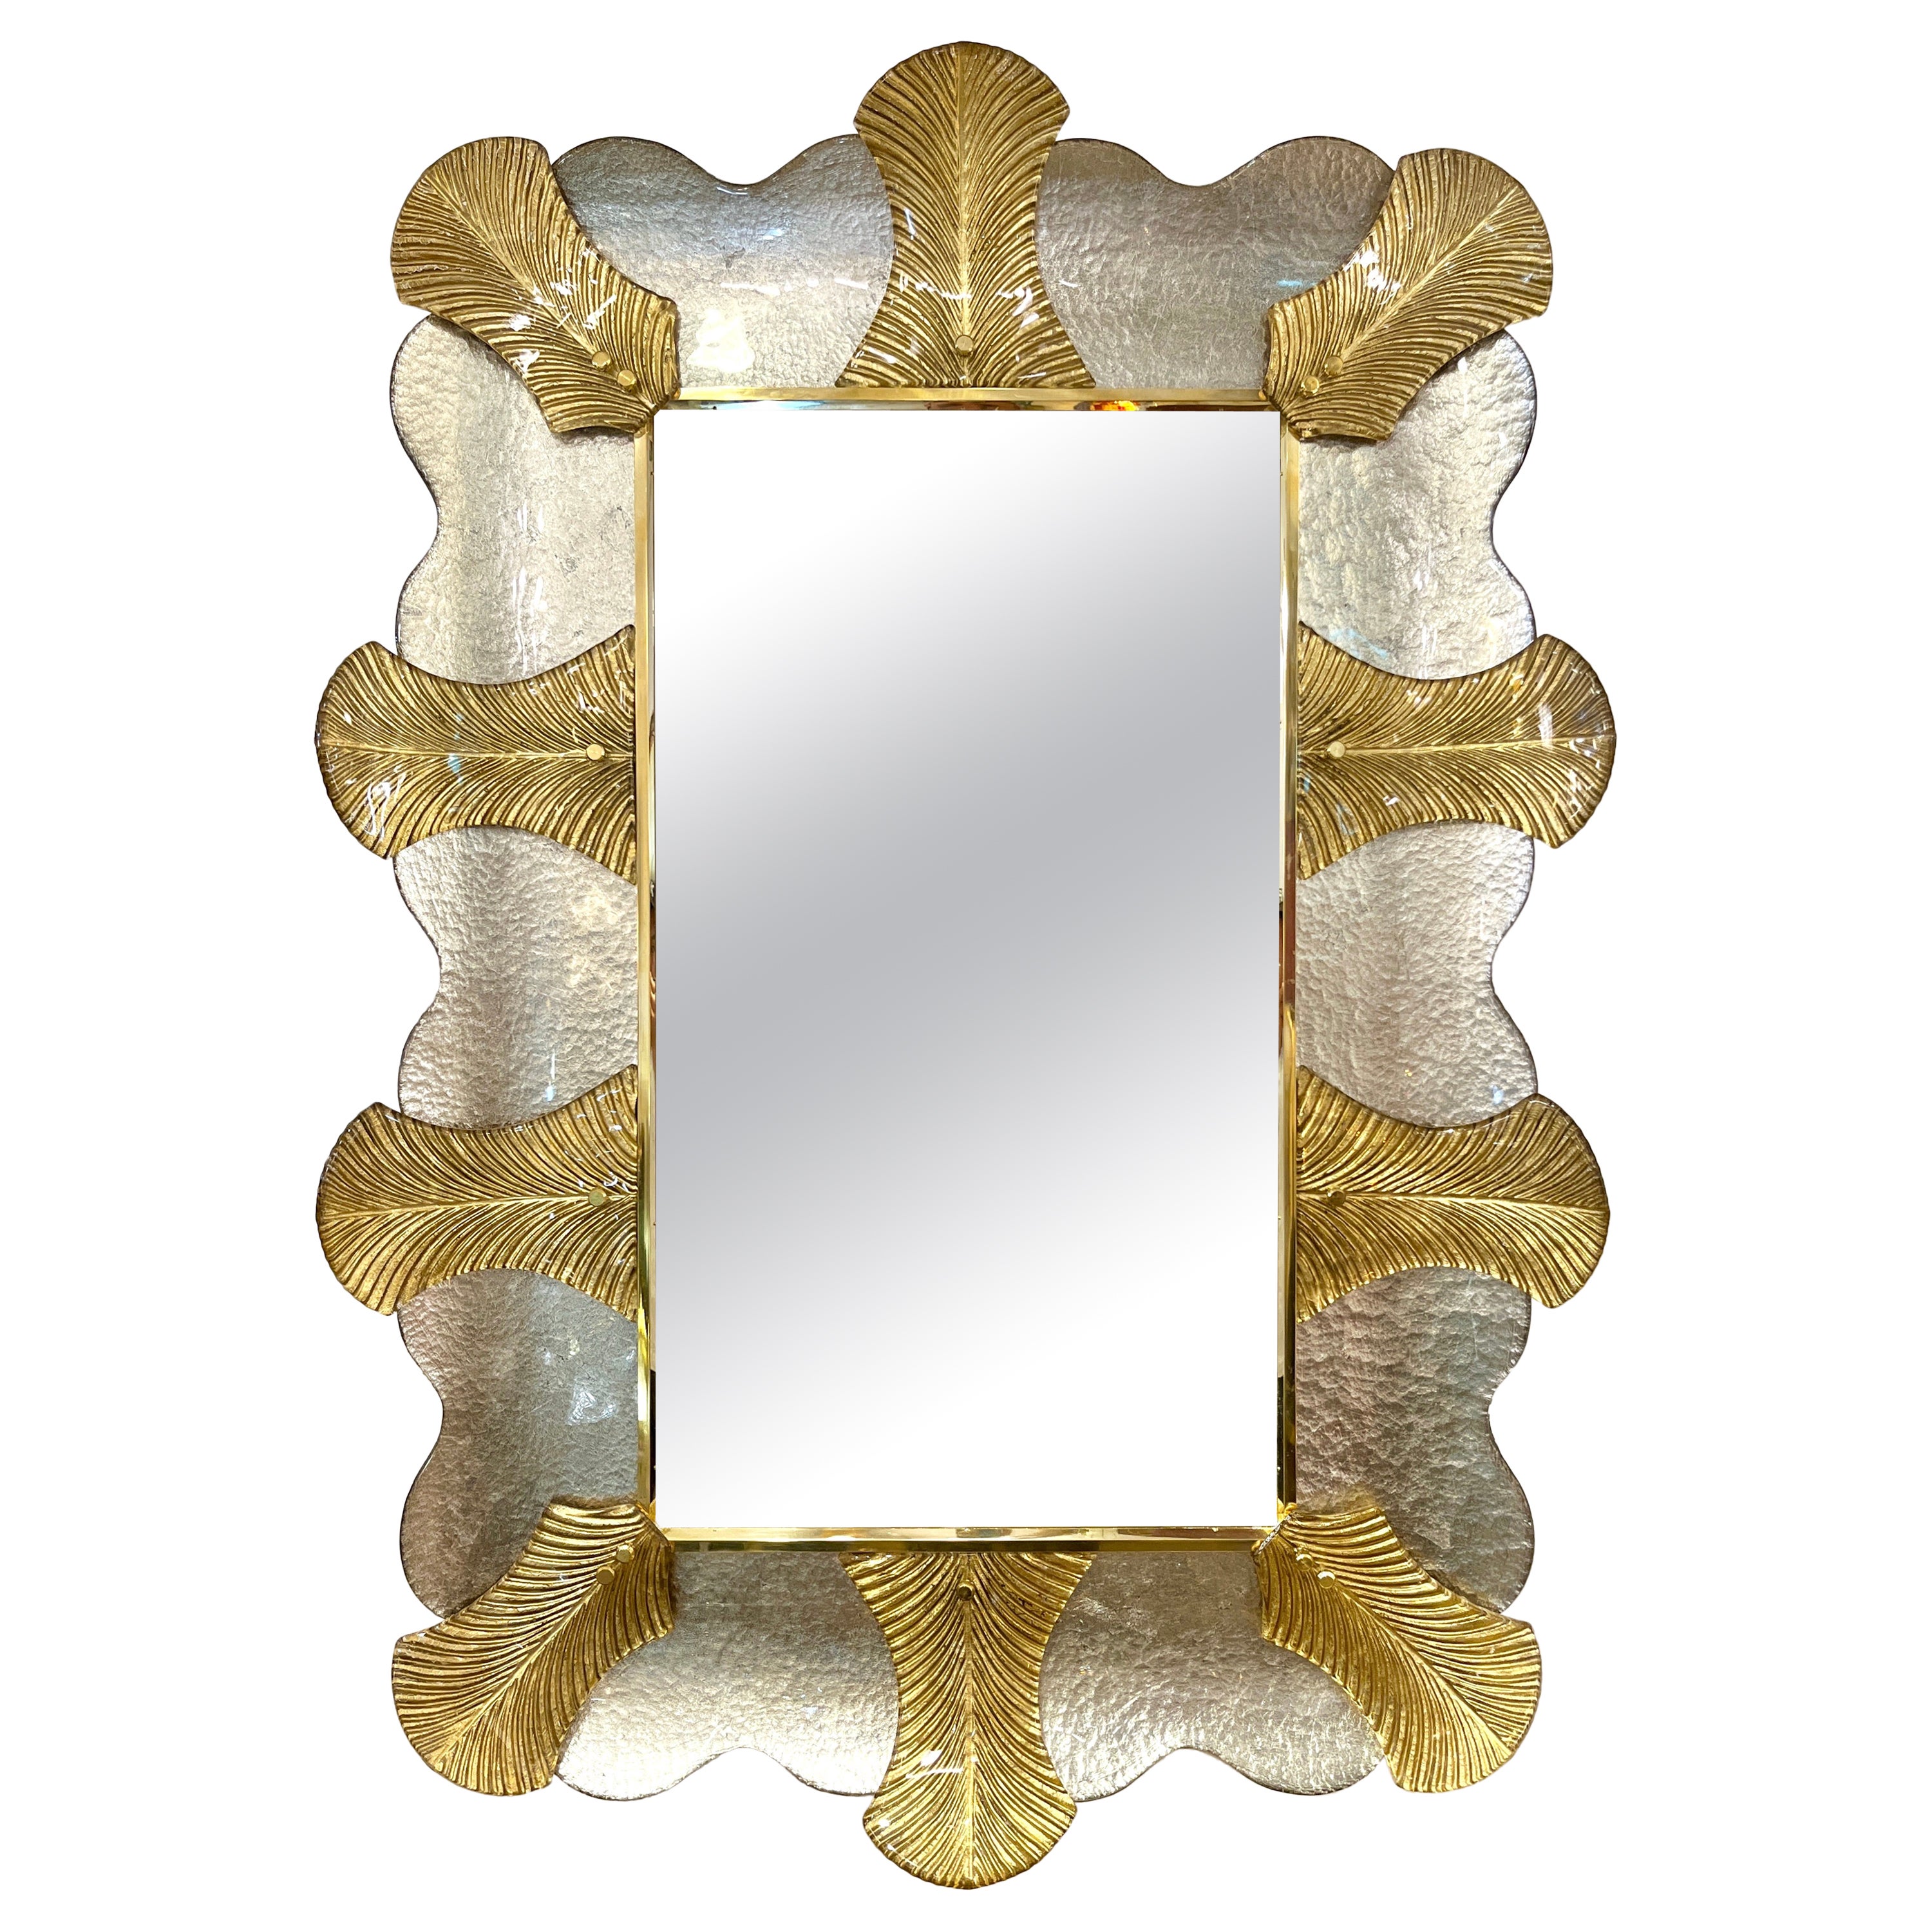 Bespoke Italian Art Deco Style Curved Leaf Gold Silver Murano Glass Brass Mirror For Sale